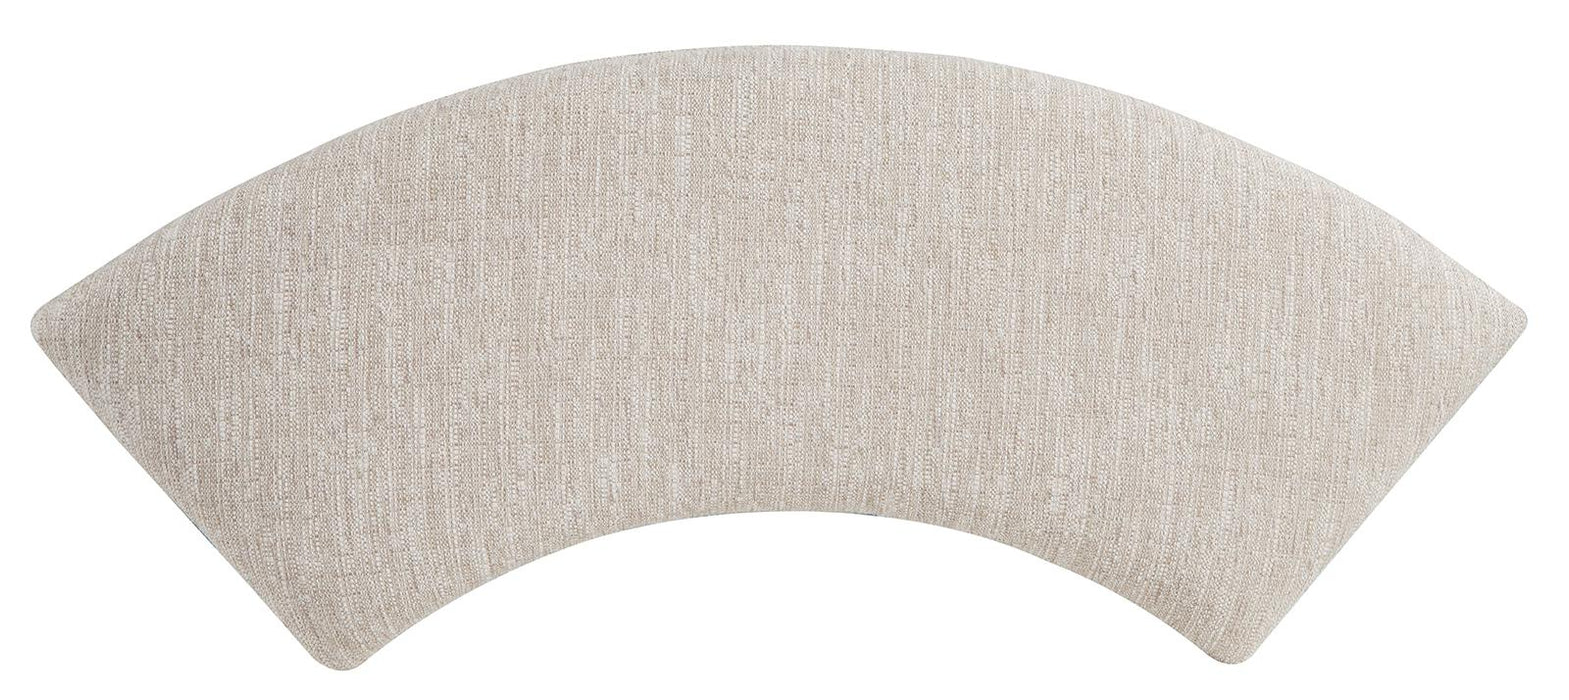 Magnussen Furniture Paxton Place Curved Bench w/ Upholstered Seat in Dovetail Grey